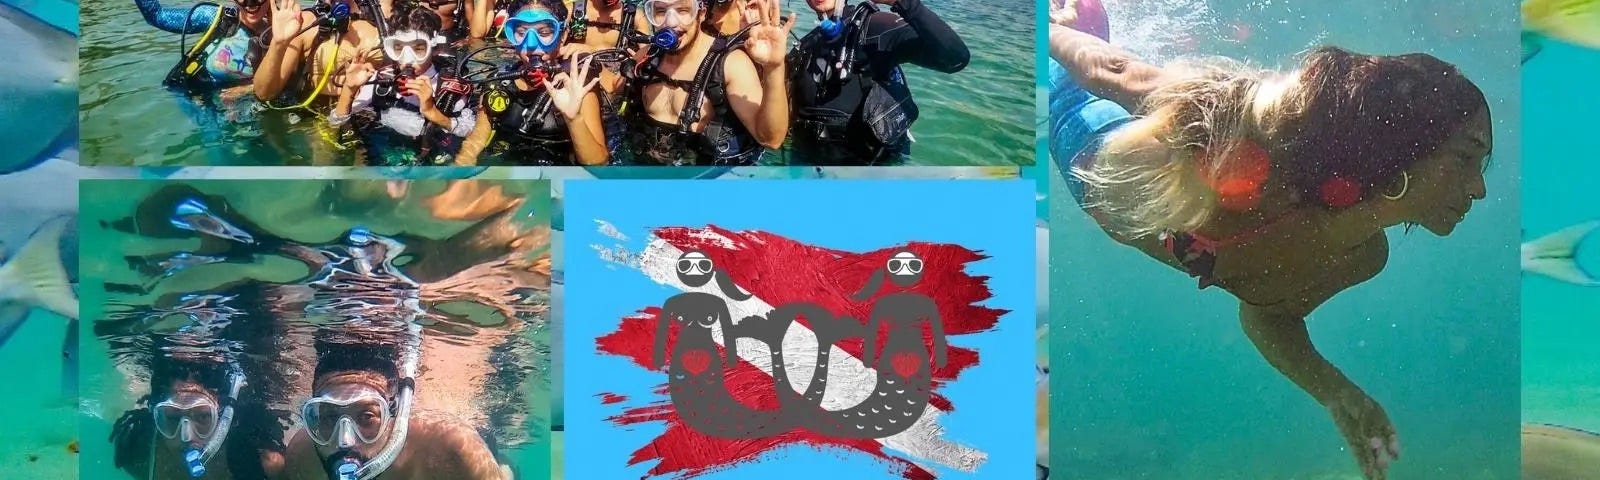 Five images of Adventure Mermaid guests on our SCUBA, snorkeling, and mermaiding experiences. In the center, the Adventure Mermaid logo, a red diver-down flag with two mermaids wearing SCUBA masks